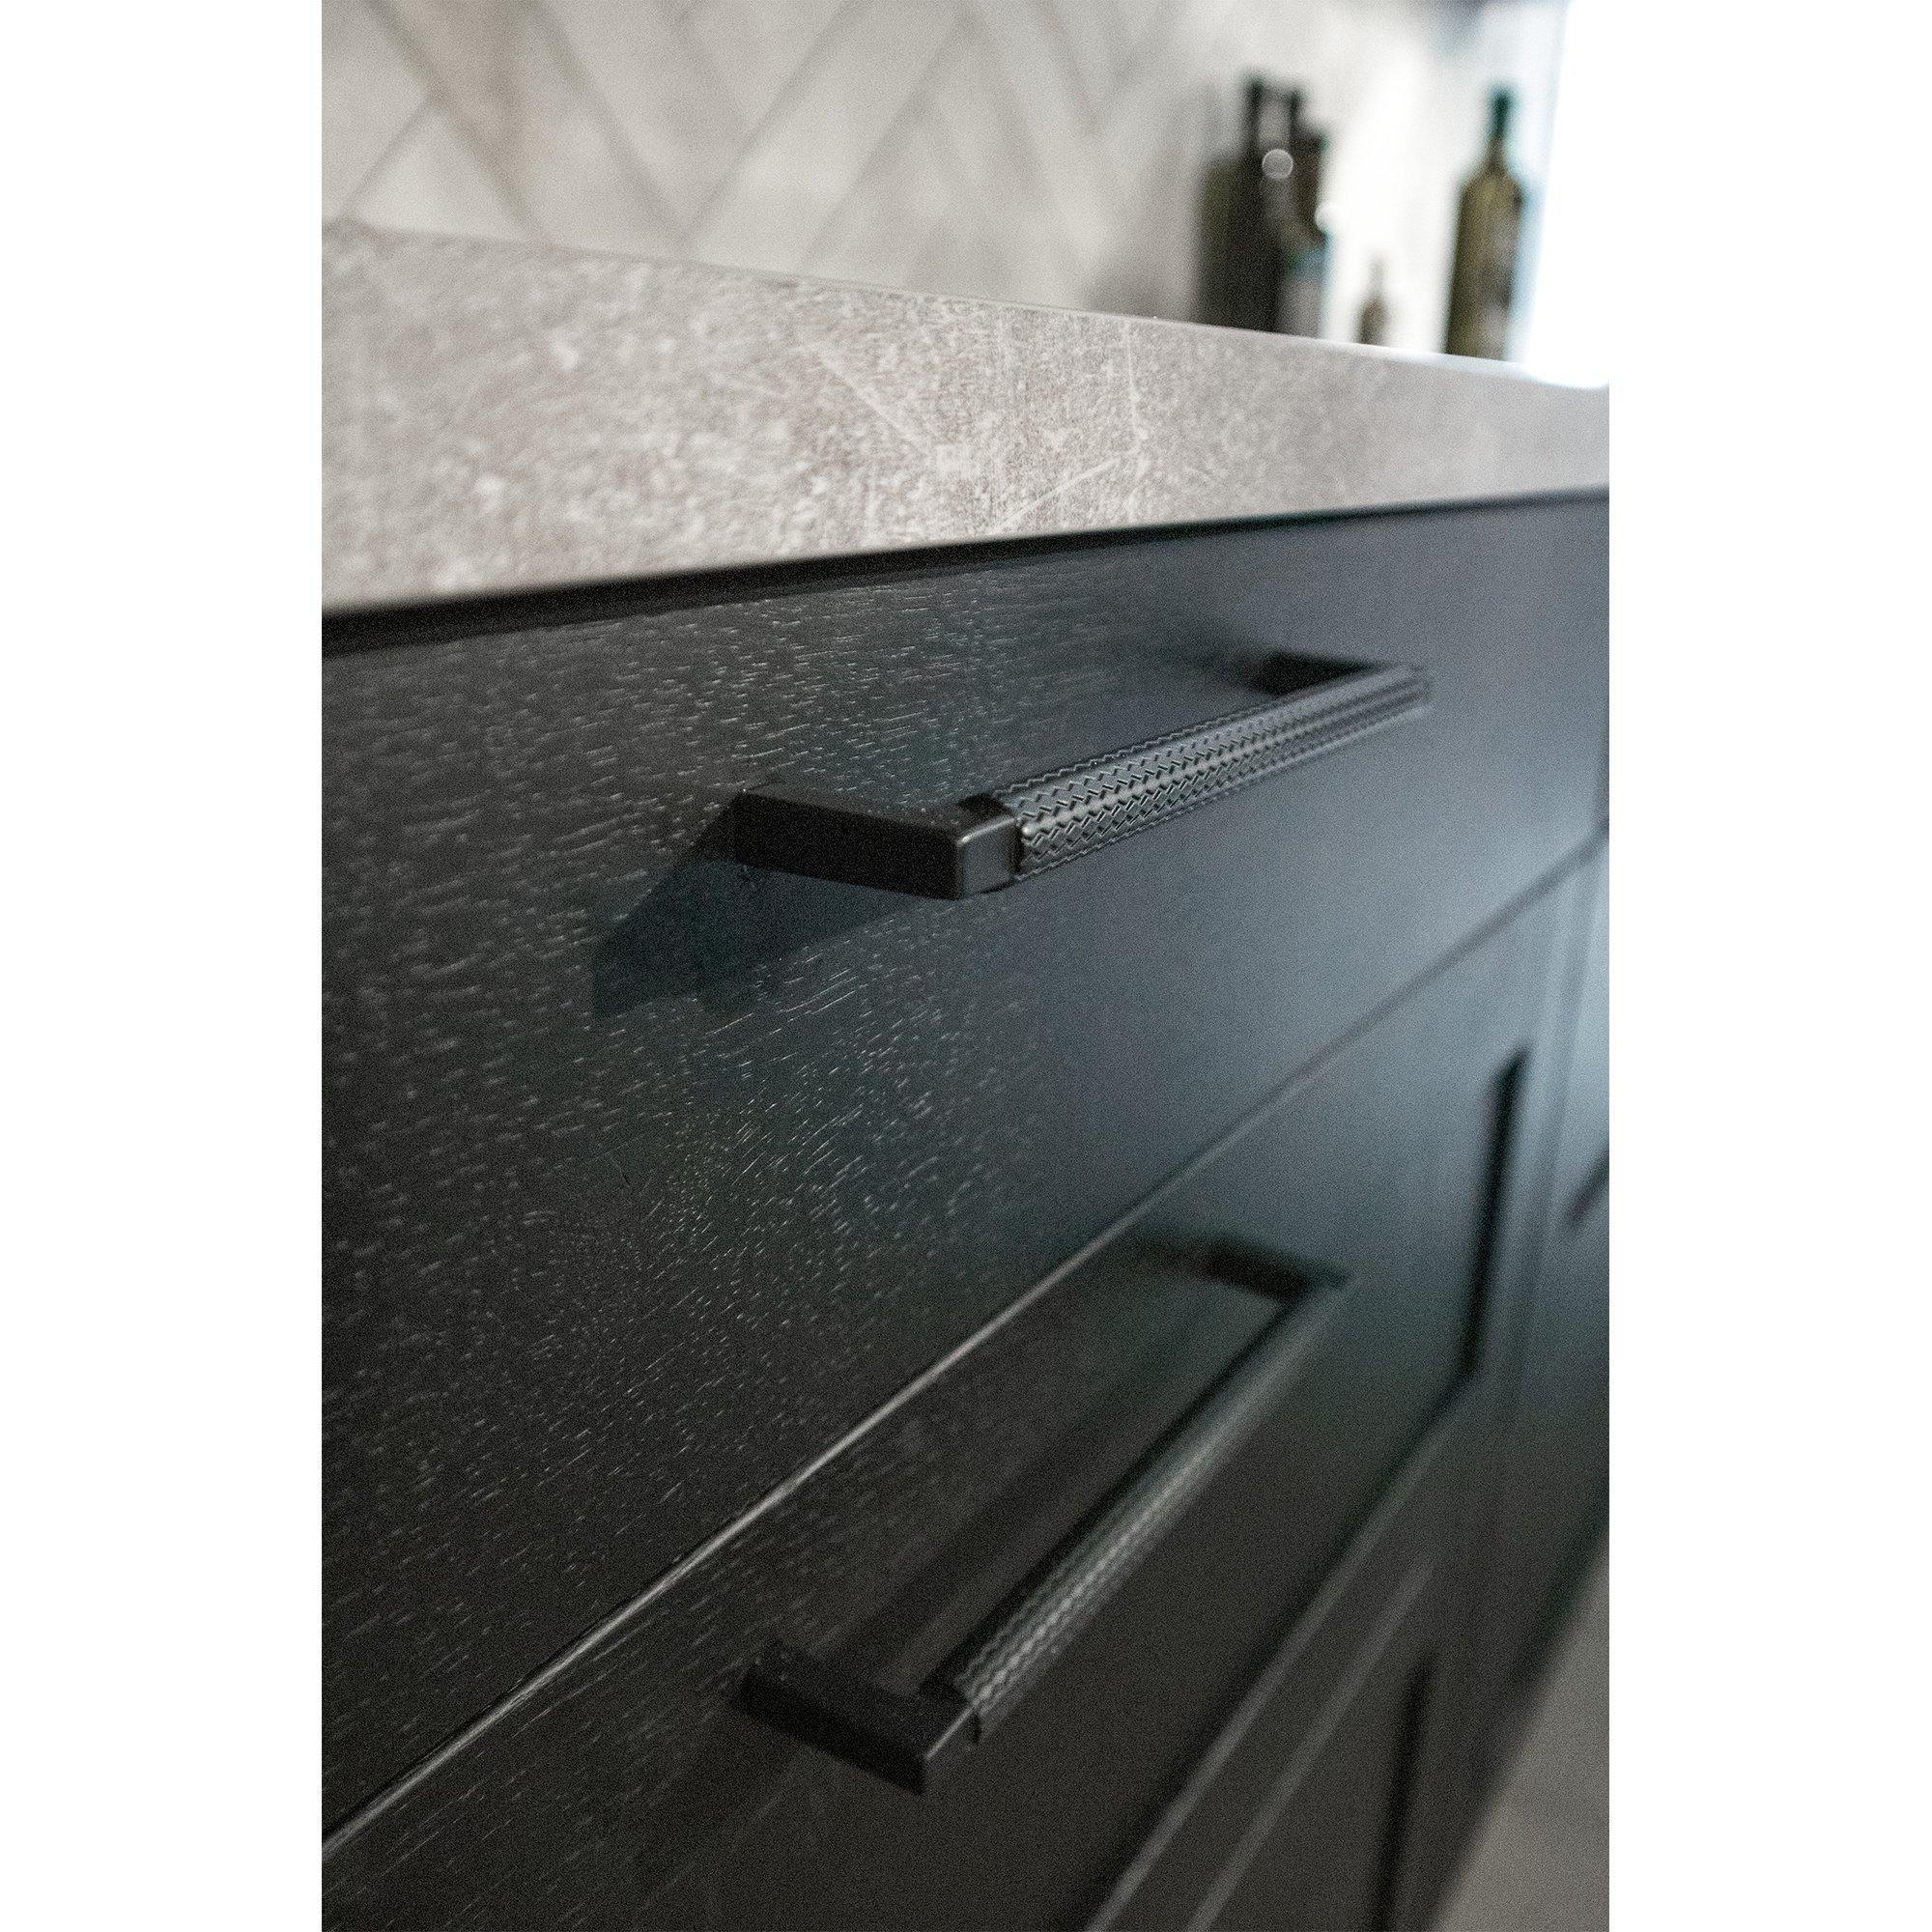 Handle Track, Matt black, available in different sizes (168/328mm) - Scandi Handles